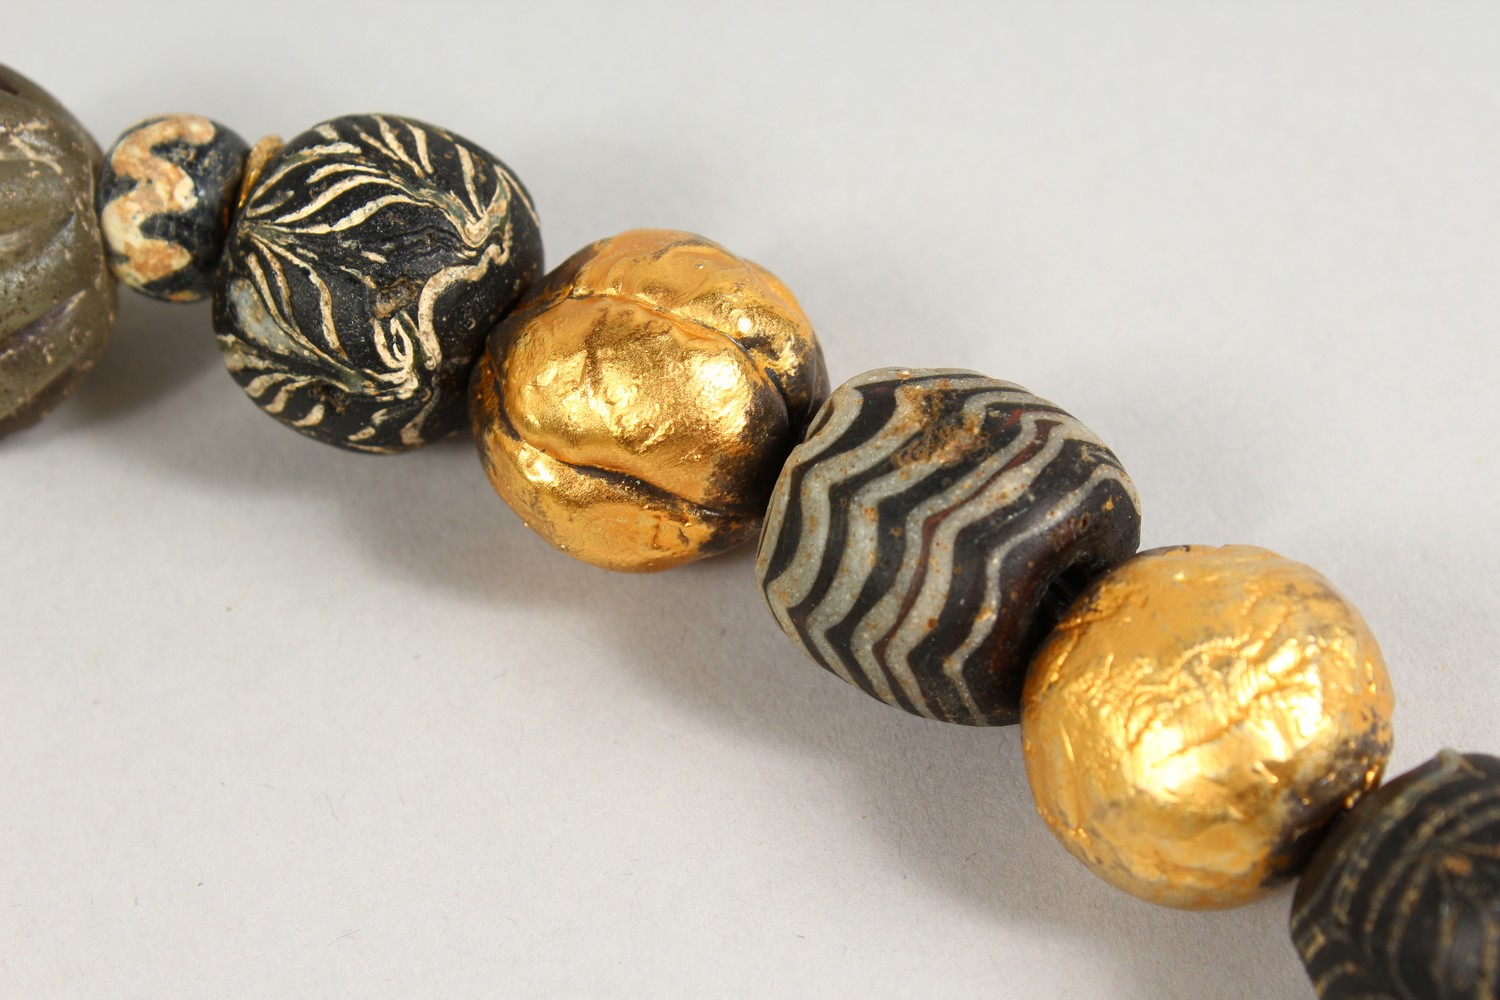 A SUPERB LARGE ROMAN BEAD NECKLACE. - Image 3 of 6